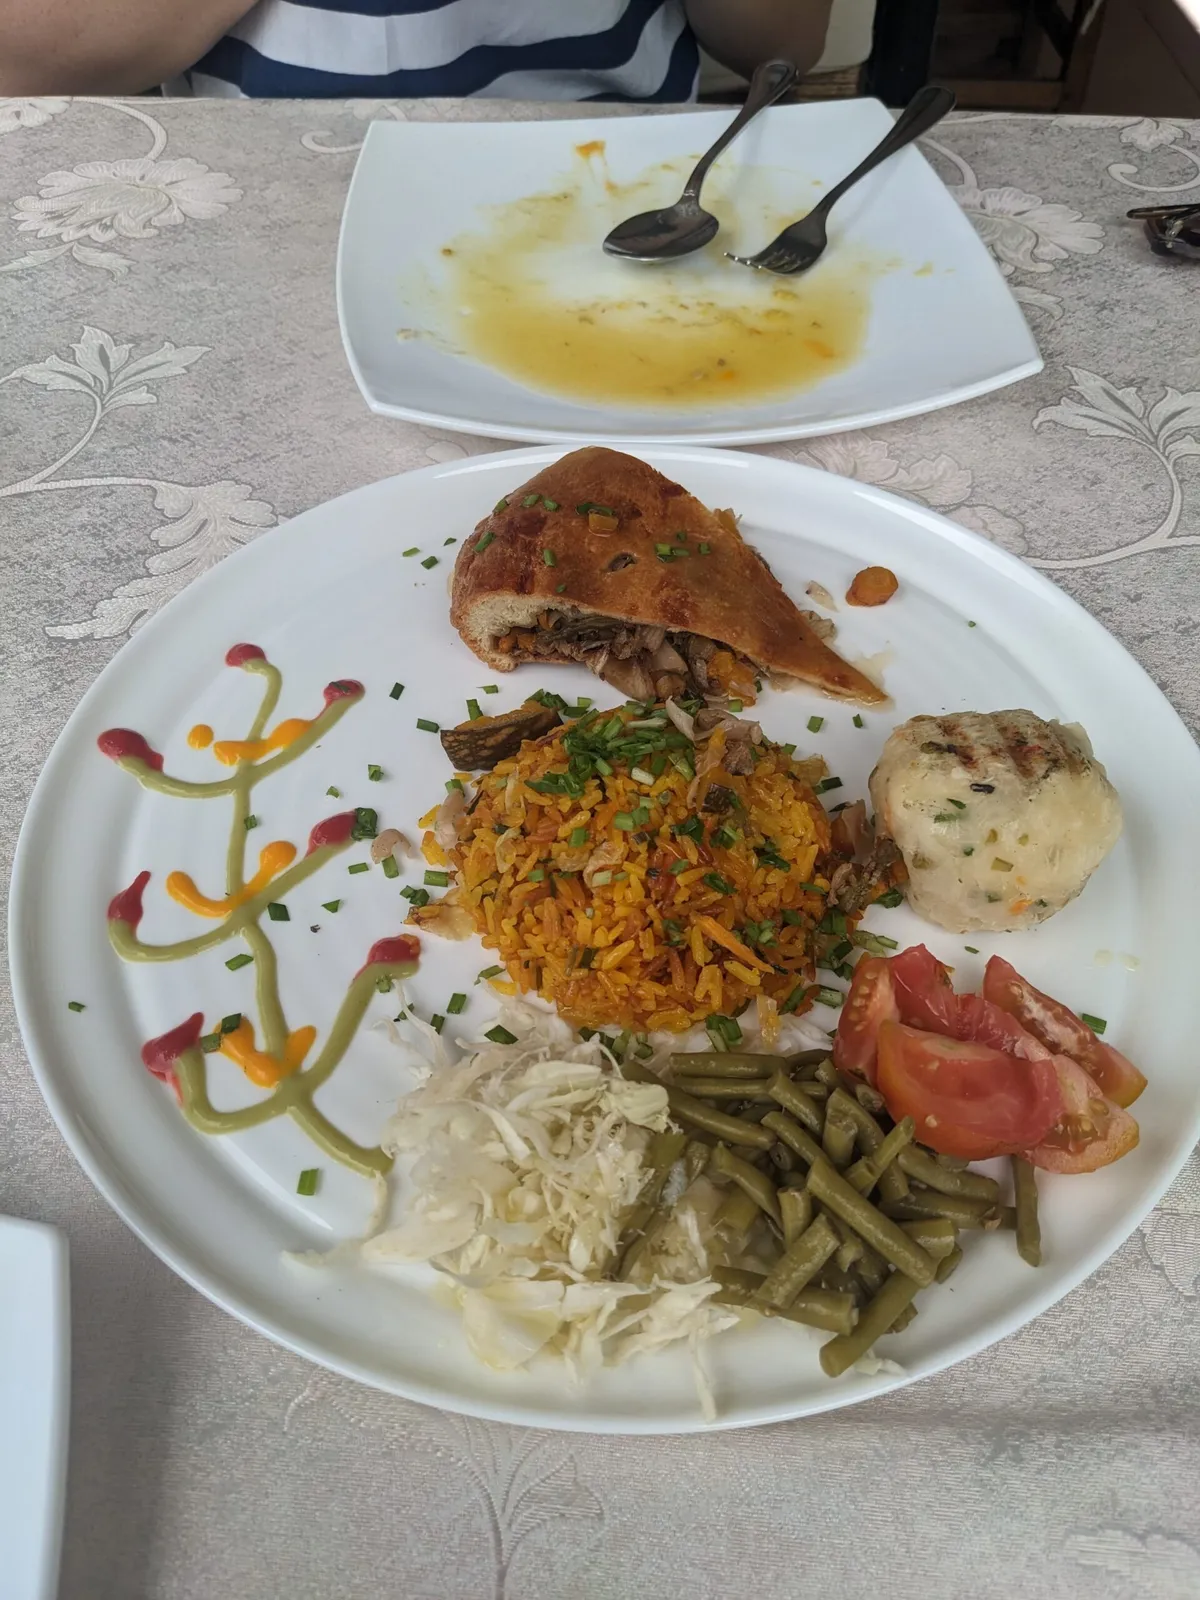 Plate of food with rice, pastry and vegetables from Cuba.